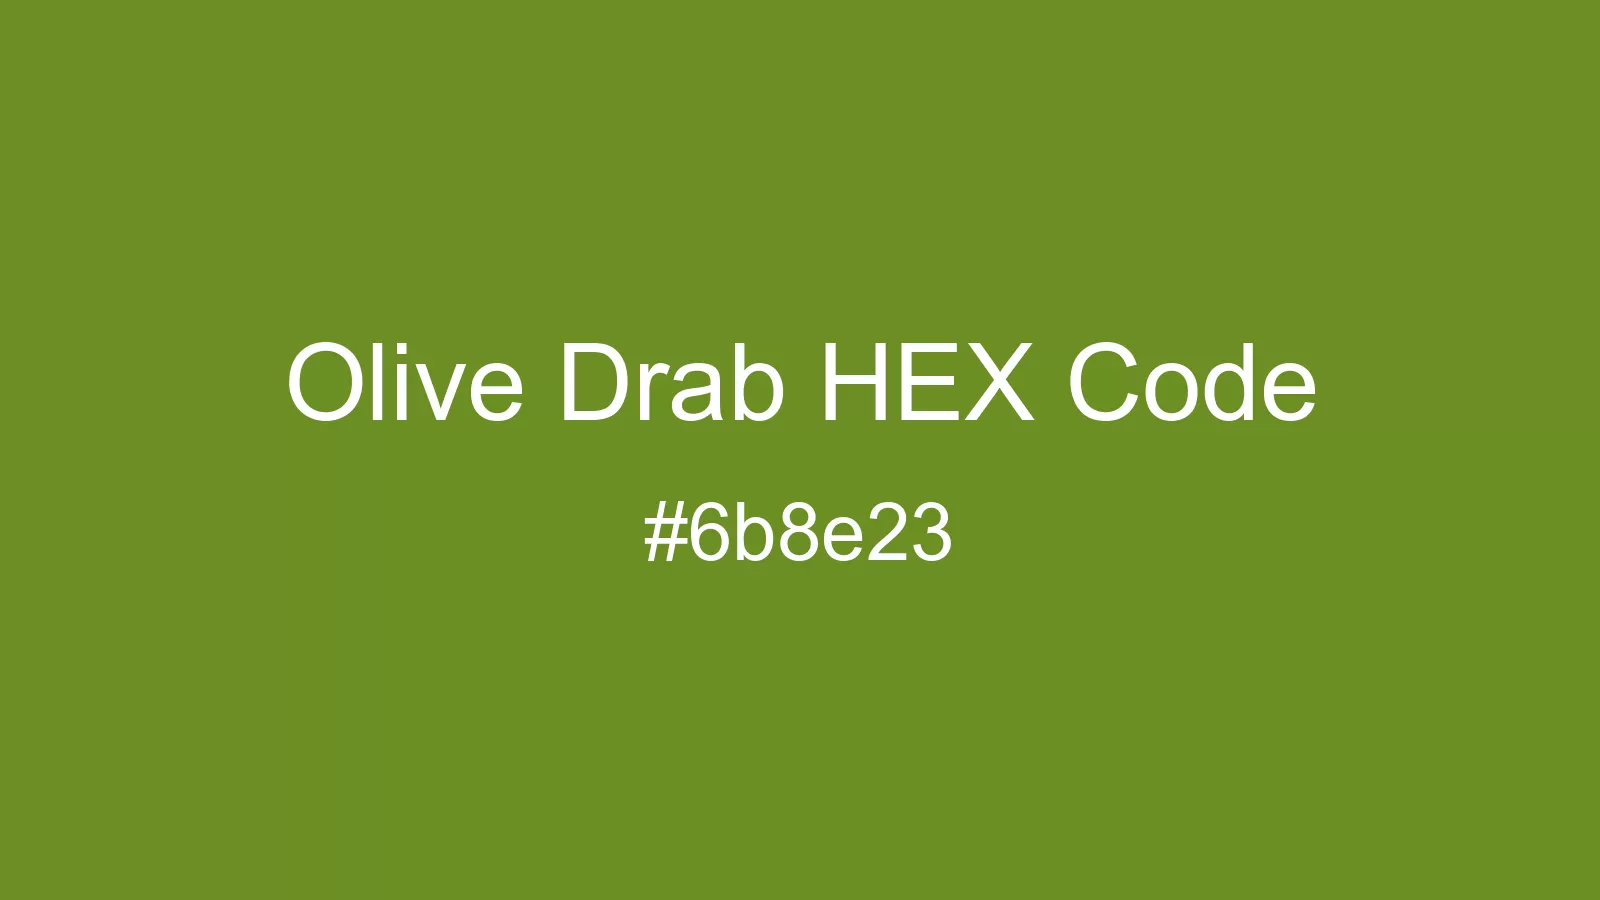 preview image of Olive Drab color and HEX code